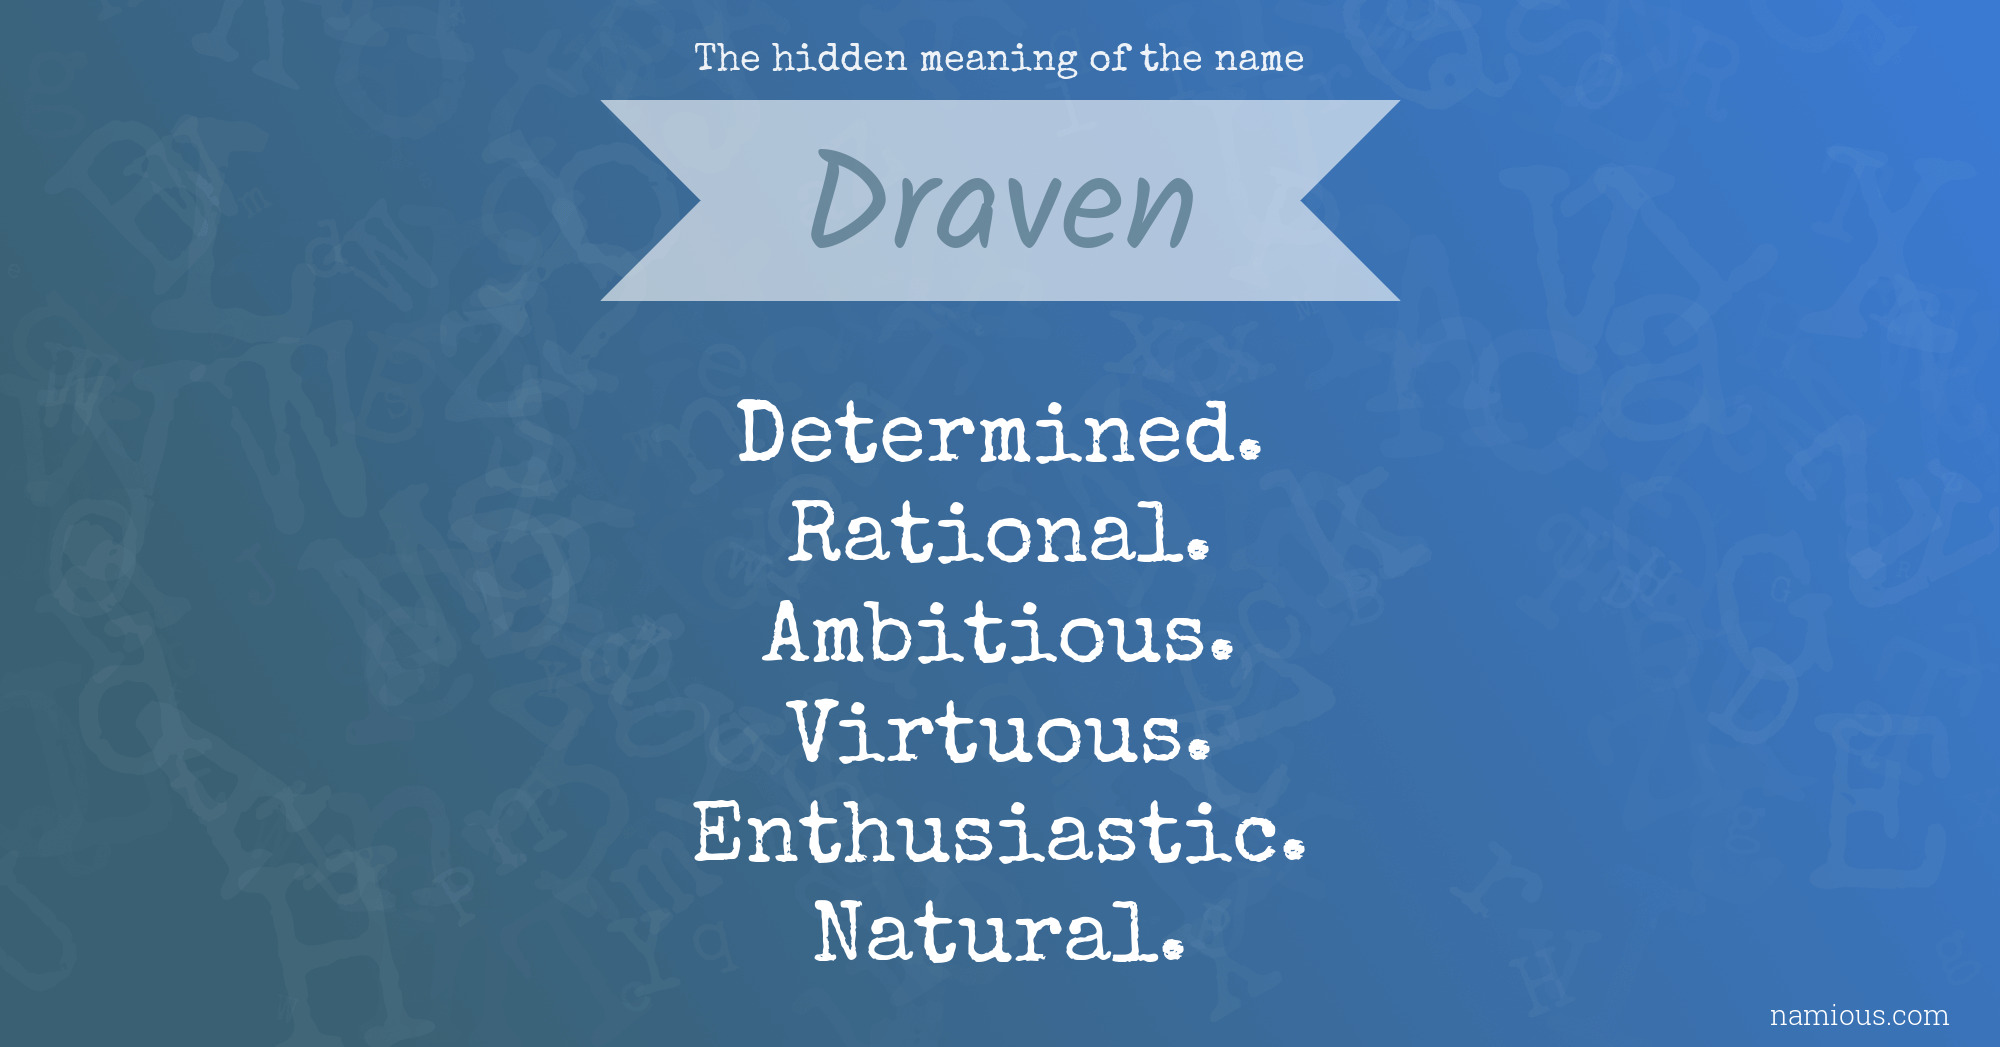 The hidden meaning of the name Draven